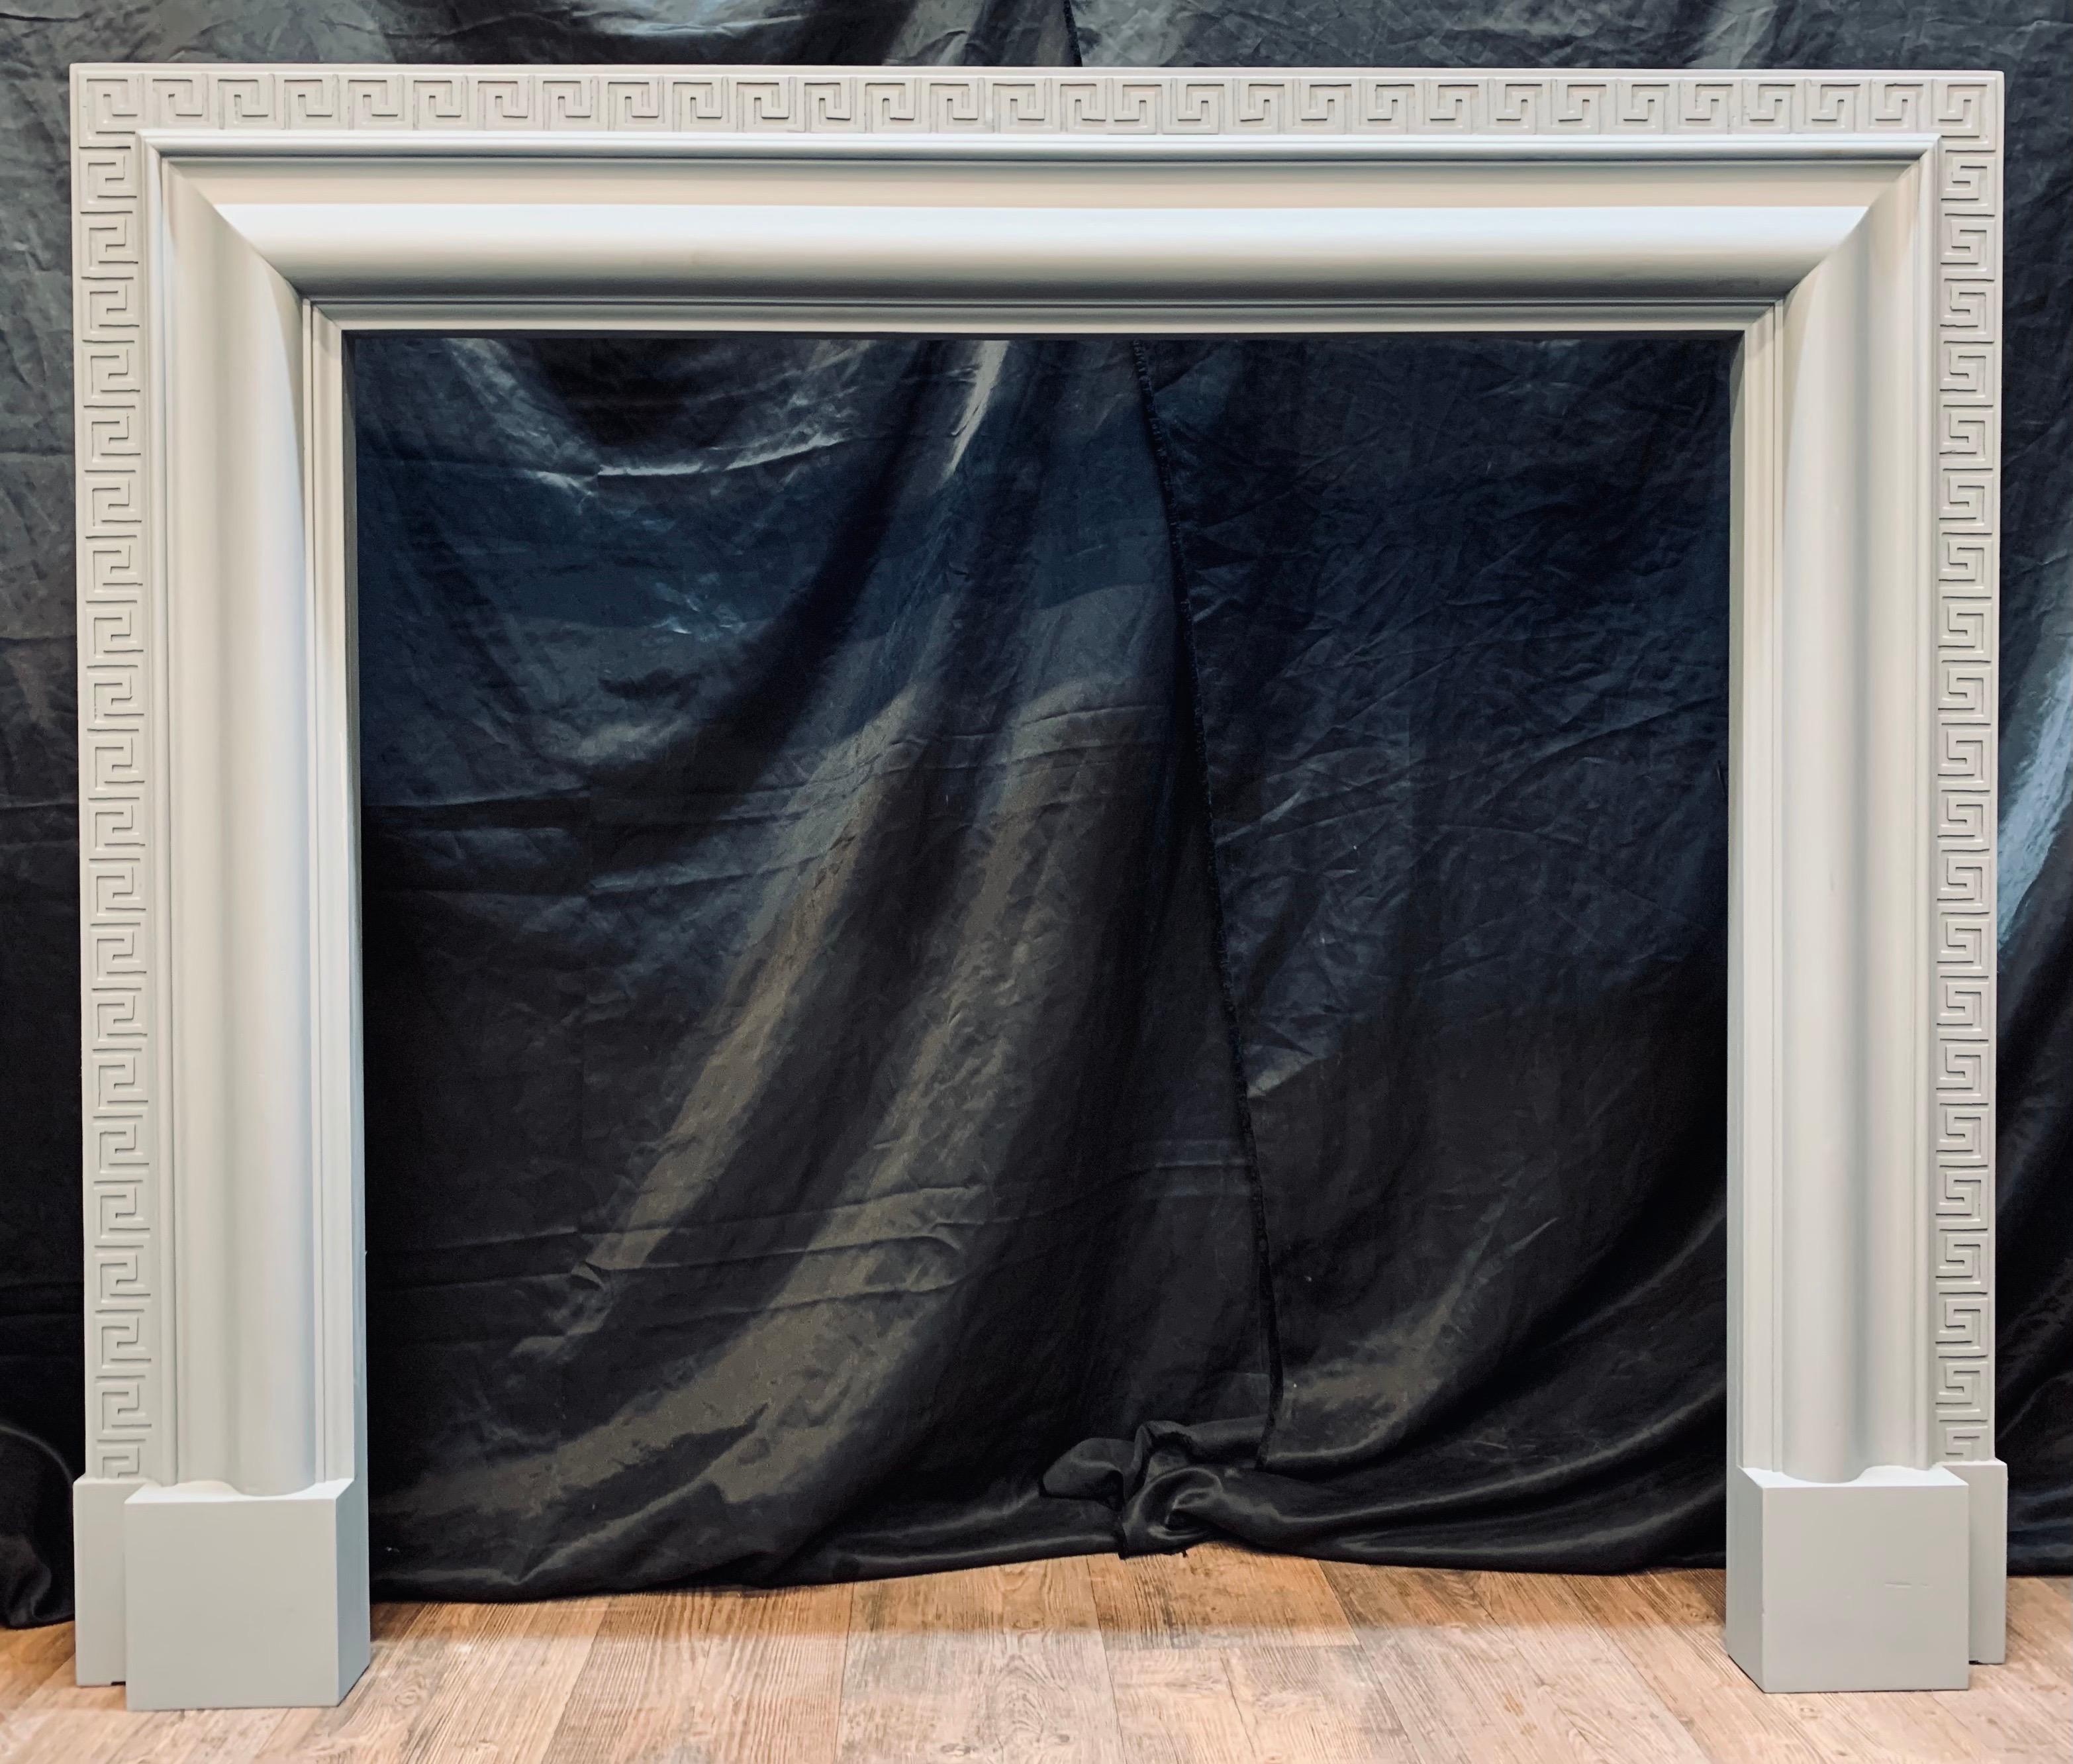 A large and attractive Edwardian Hardwood Bolection fireplace surround painted in a dove grey undercoat. A generously deep return connects to a sweeping bolection moulded frame with a carved outer border of ‘Meander’ (Greek Key) all supported and